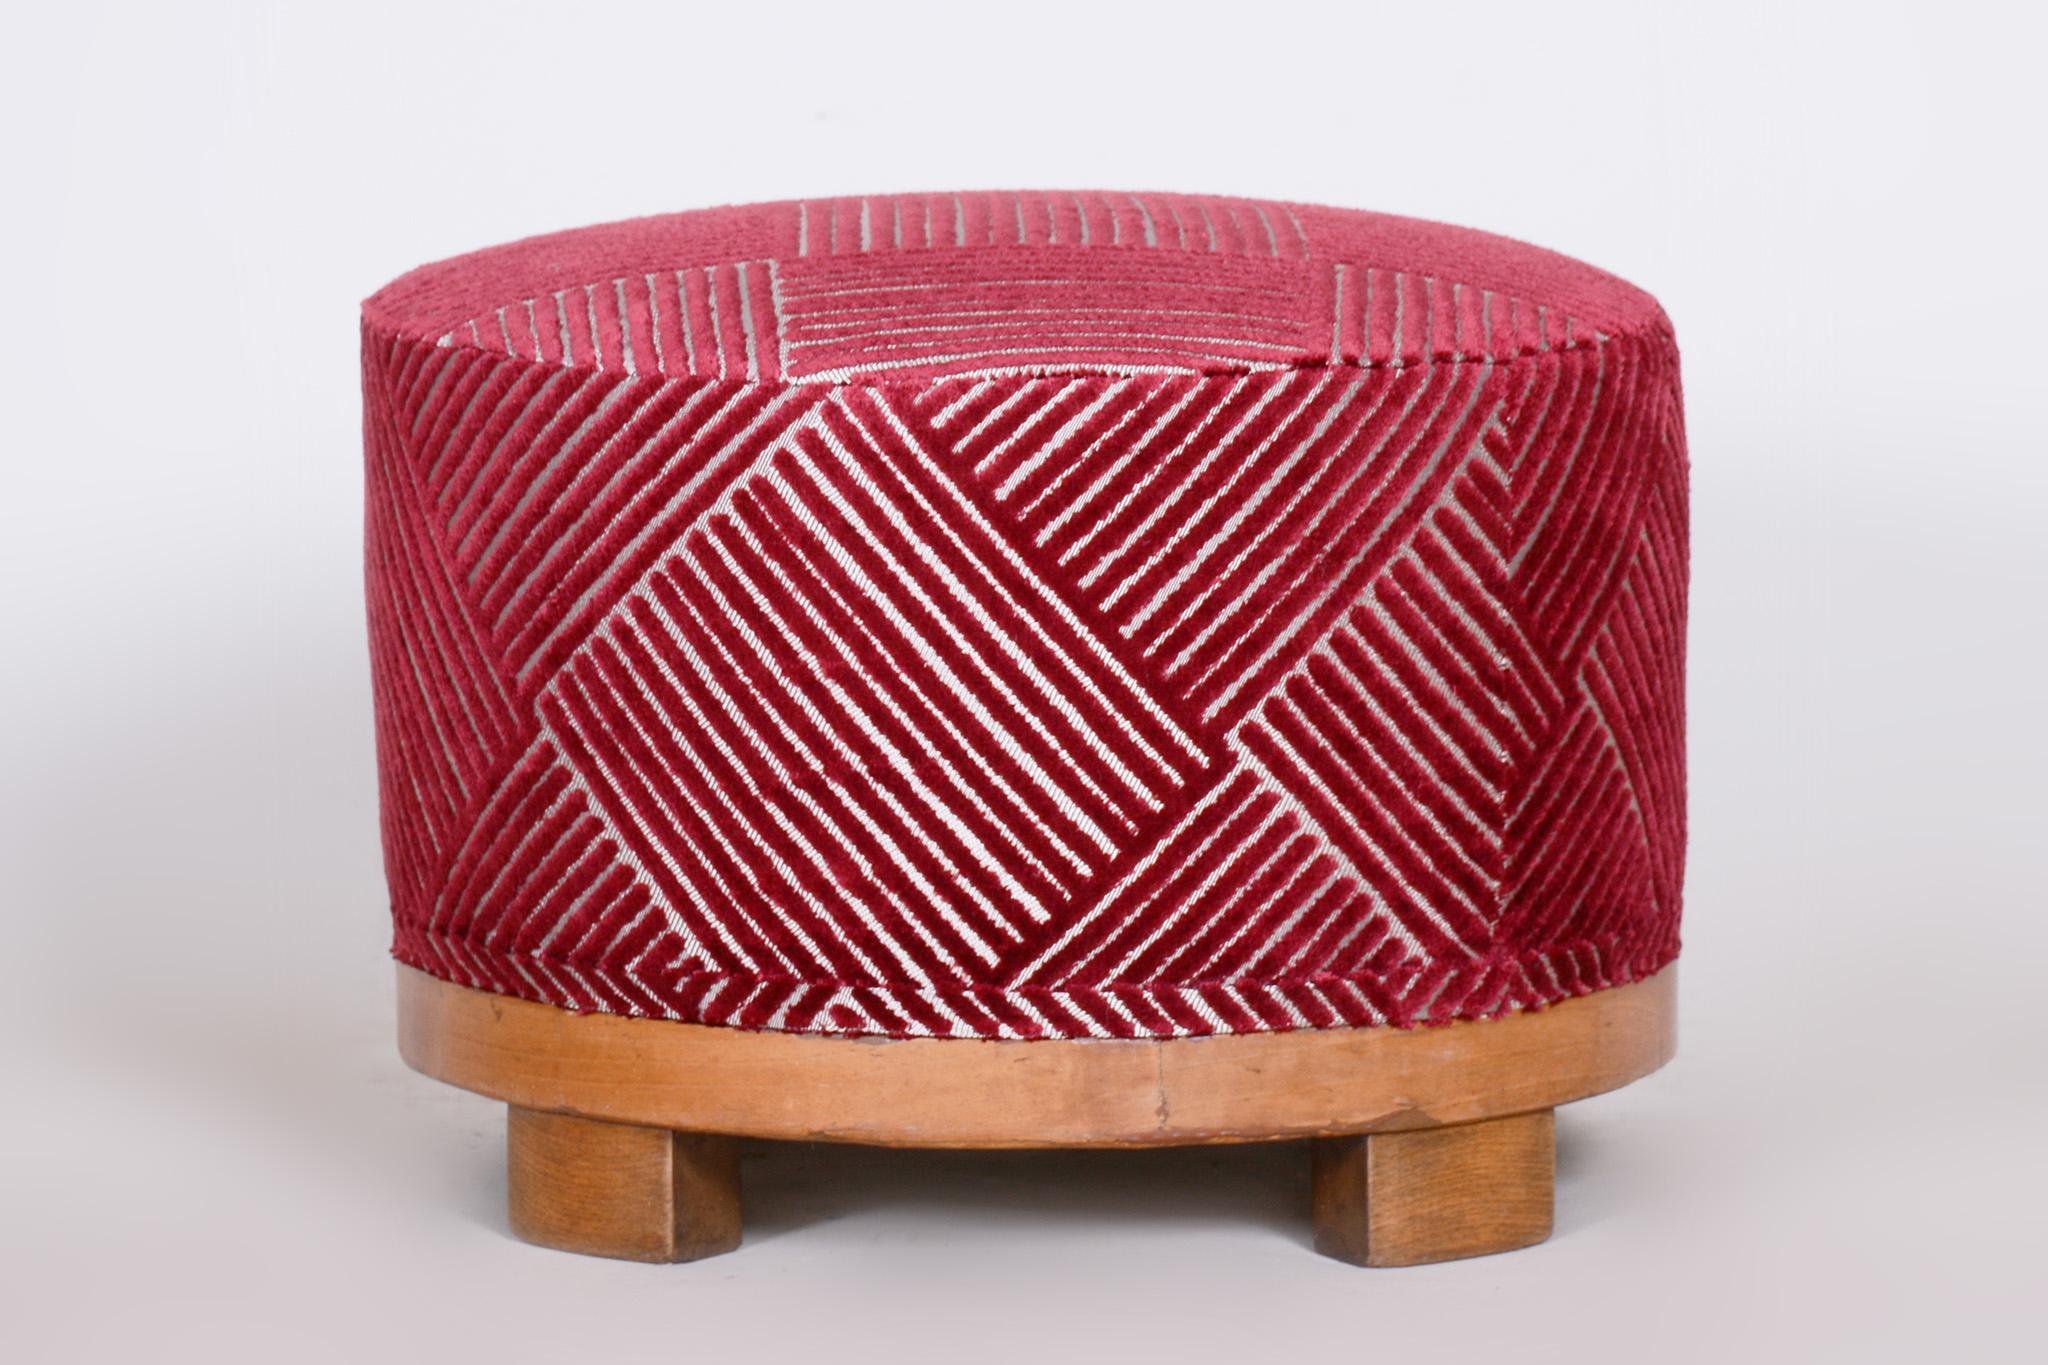 Czech Red Art Deco Stool, Made in the 1920s, Fully Restored